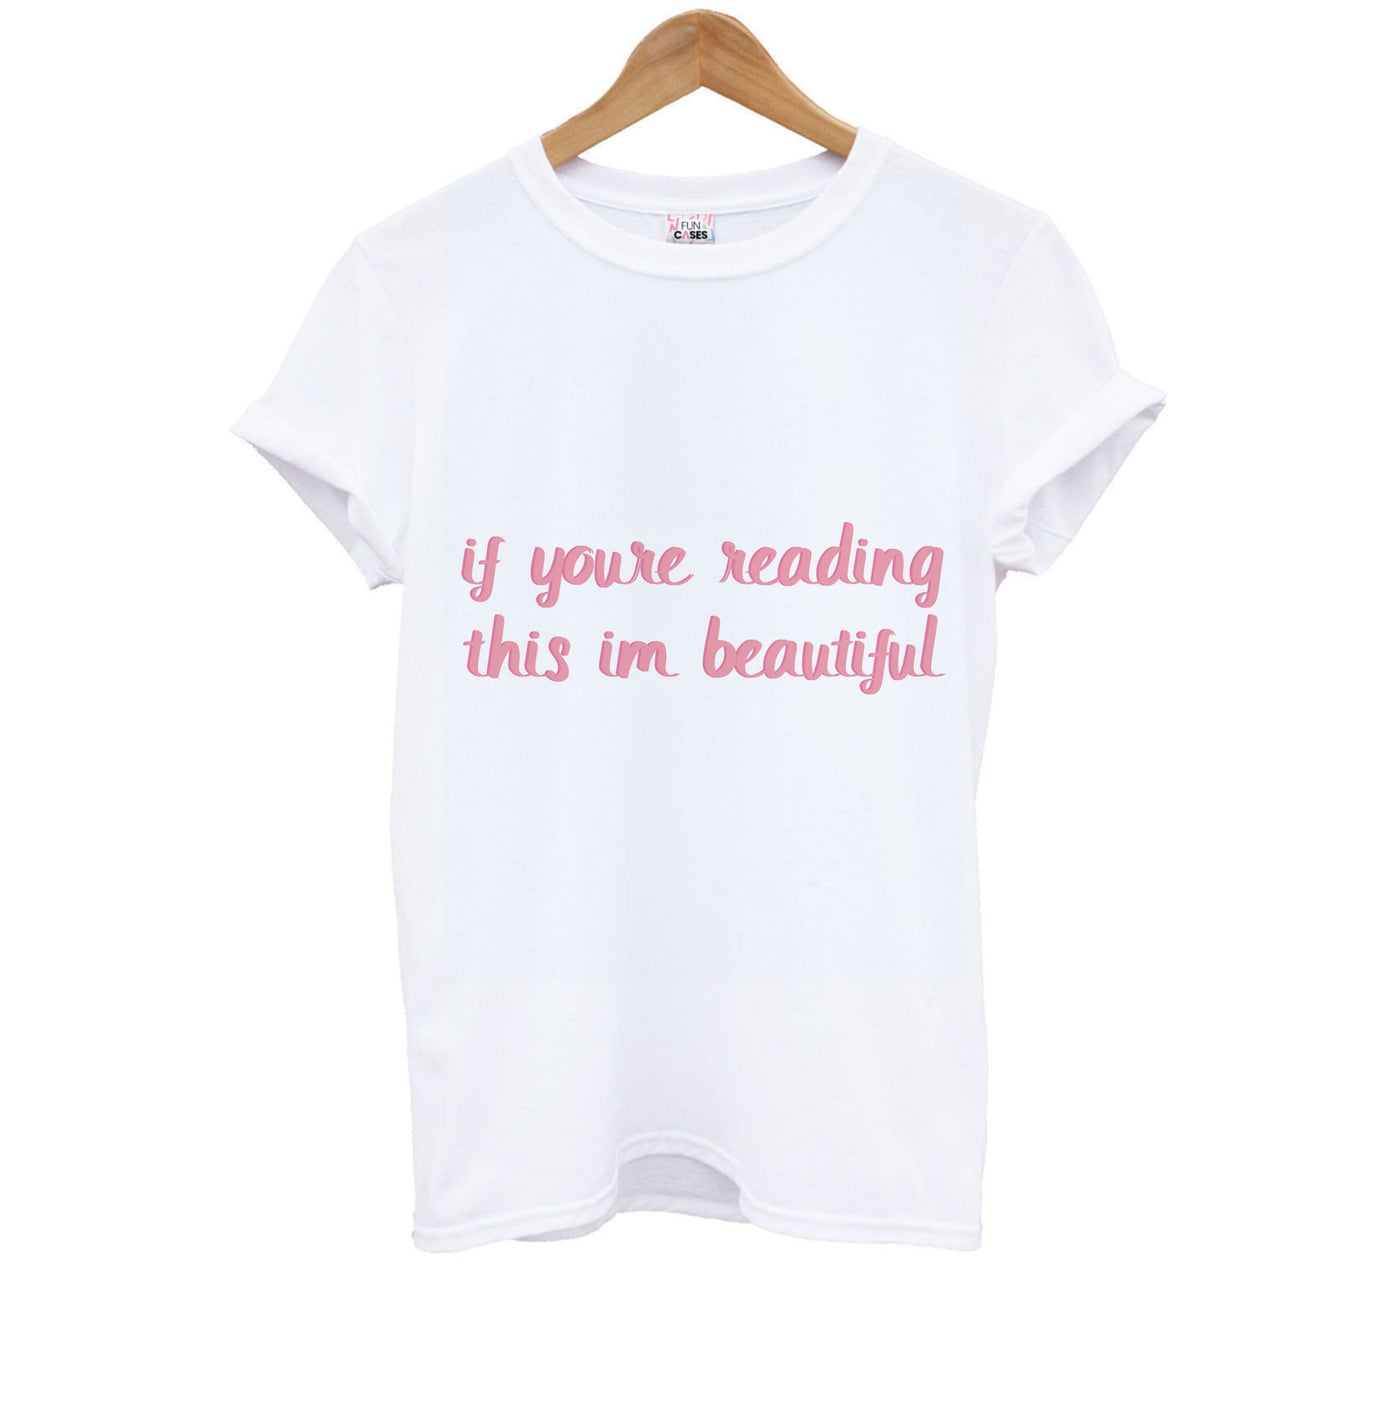 If You're Reading This Im Beautiful - Funny Quotes Kids T-Shirt